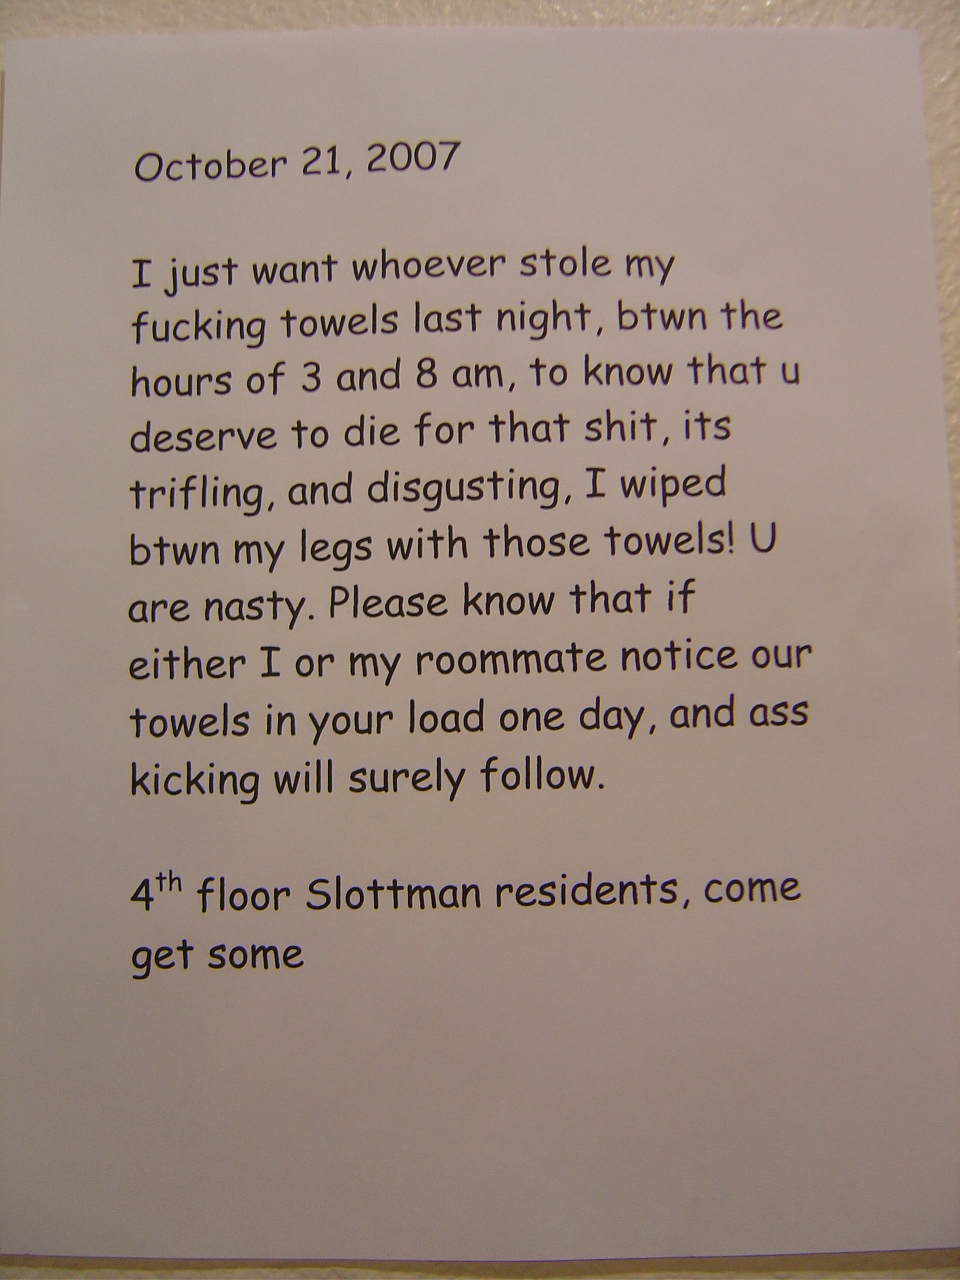 I just want whoever stole my fucking towels last night, btwn the hours of 3 and 8 am, to know that u deserve to die for that shit, its [sic] trifling, and disgusting. I wiped btwn my legs with those towels! U are nasty. Please know that if either I or my roommate notice our towels in your load one day, and [sic] ass kicking will surely follow. 4th floor Slottman residents, come get some. 